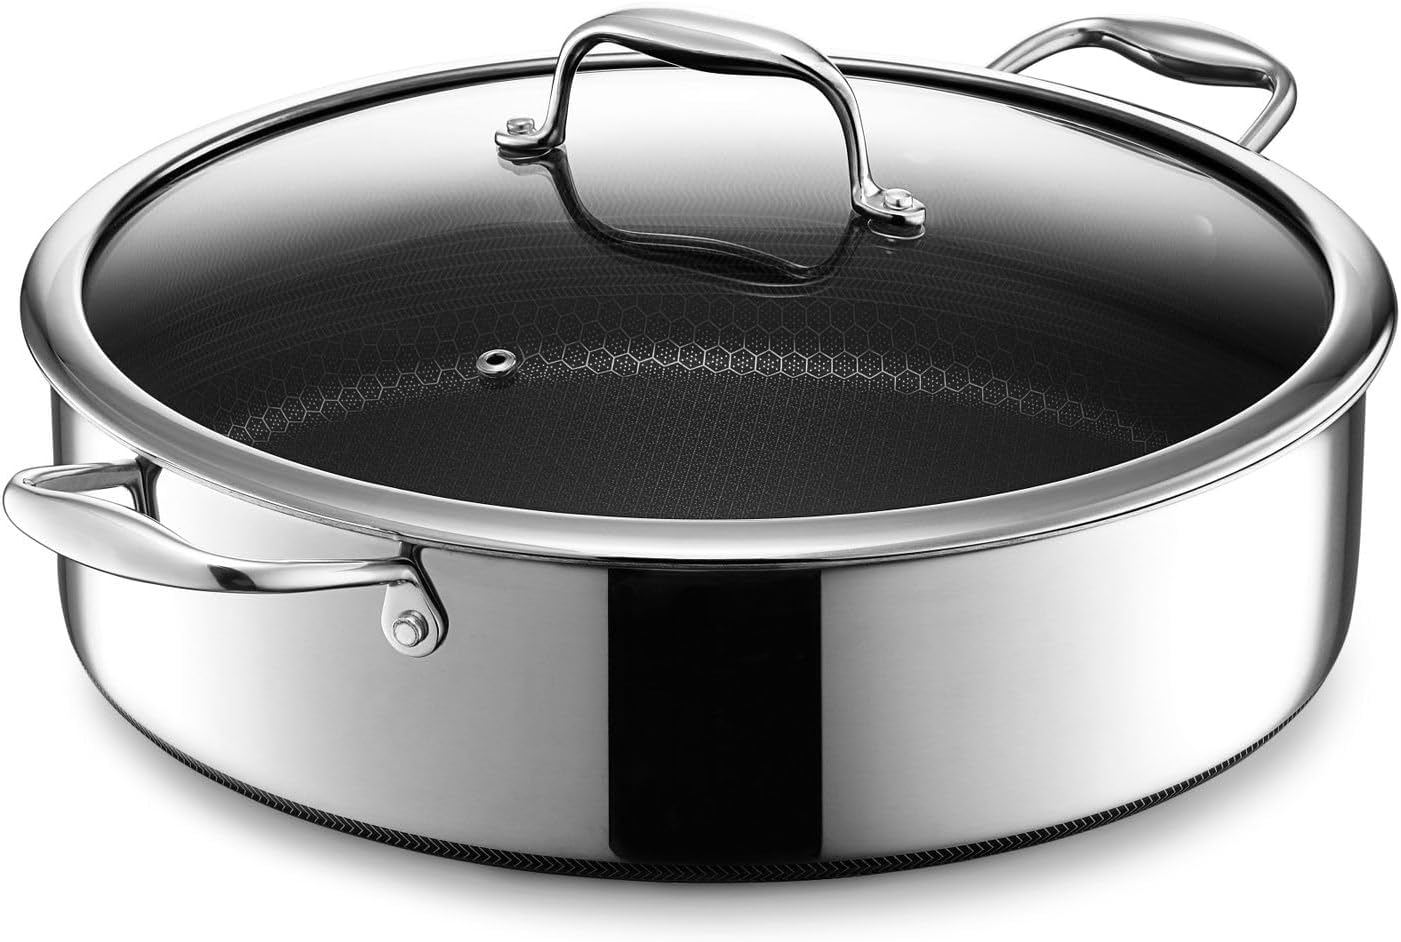 https://bigbigmart.com/wp-content/uploads/2023/09/HexClad-7-Quart-Hybrid-Saute-Pan-Nonstick-Chicken-Fryer-Dishwasher-and-Oven-Friendly-Compatible-with-All-Cooktops.jpg